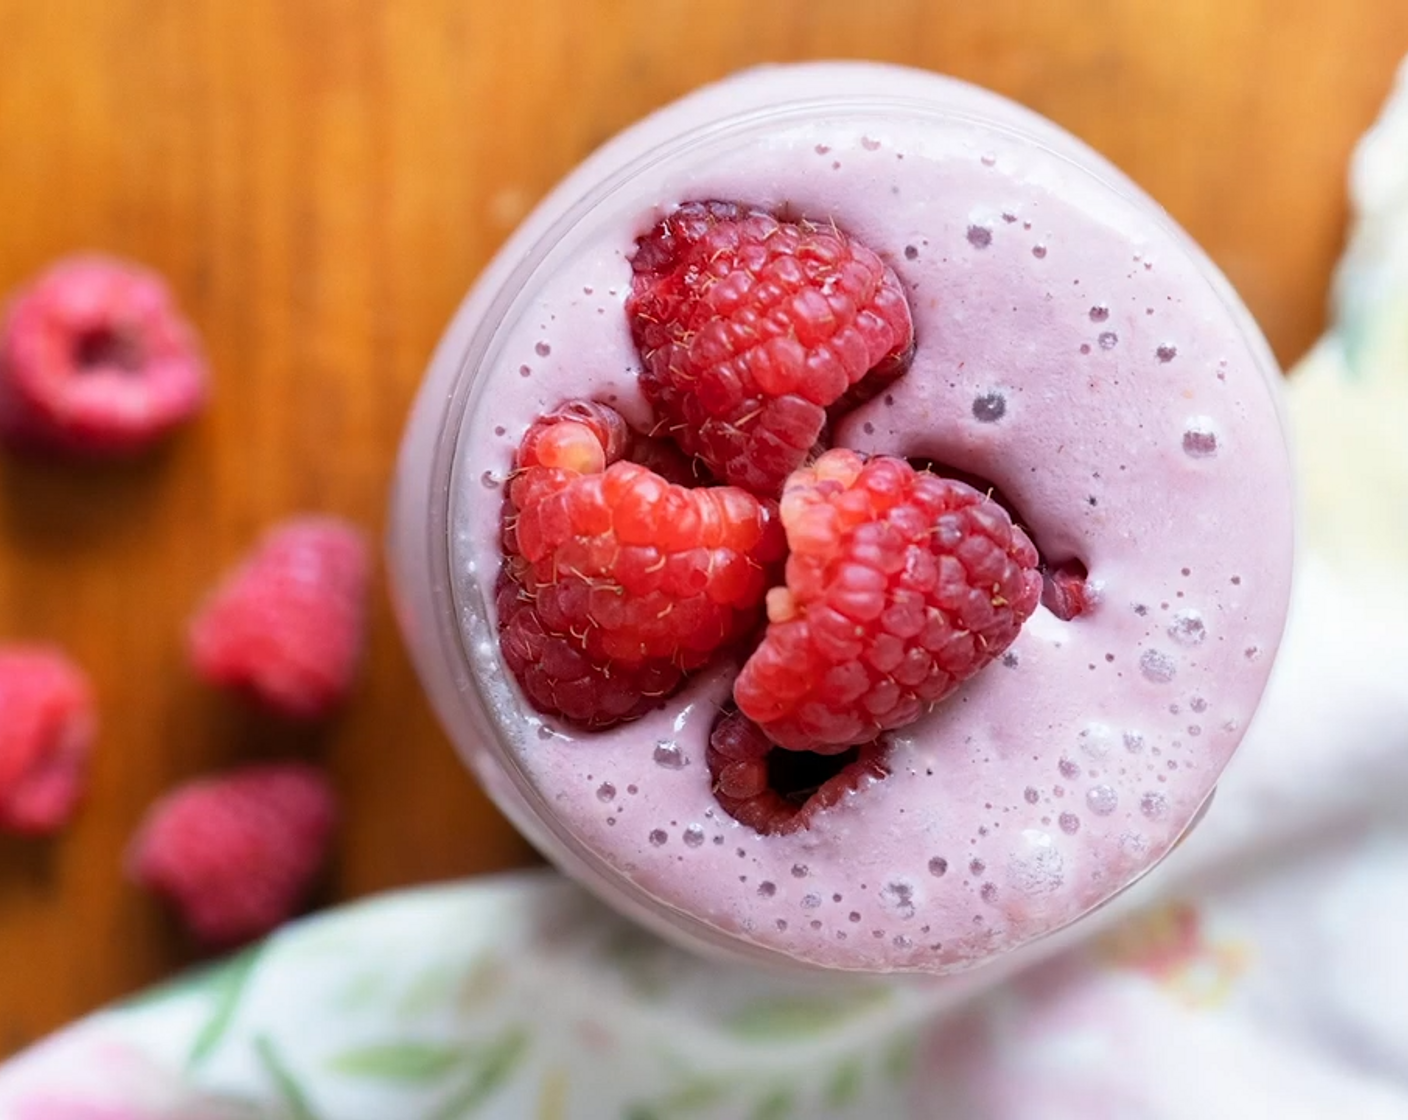 step 1 Place Fresh Raspberry (3/4 cup), Plain Yogurt (1/2 cup), Raw Cashews (1/4 cup), Plant-Based Vanilla Protein Powder (1 scoop), Medjool Dates (1), and Non-Dairy Milk (to taste) into a high power blender and blitz until smooth and creamy.